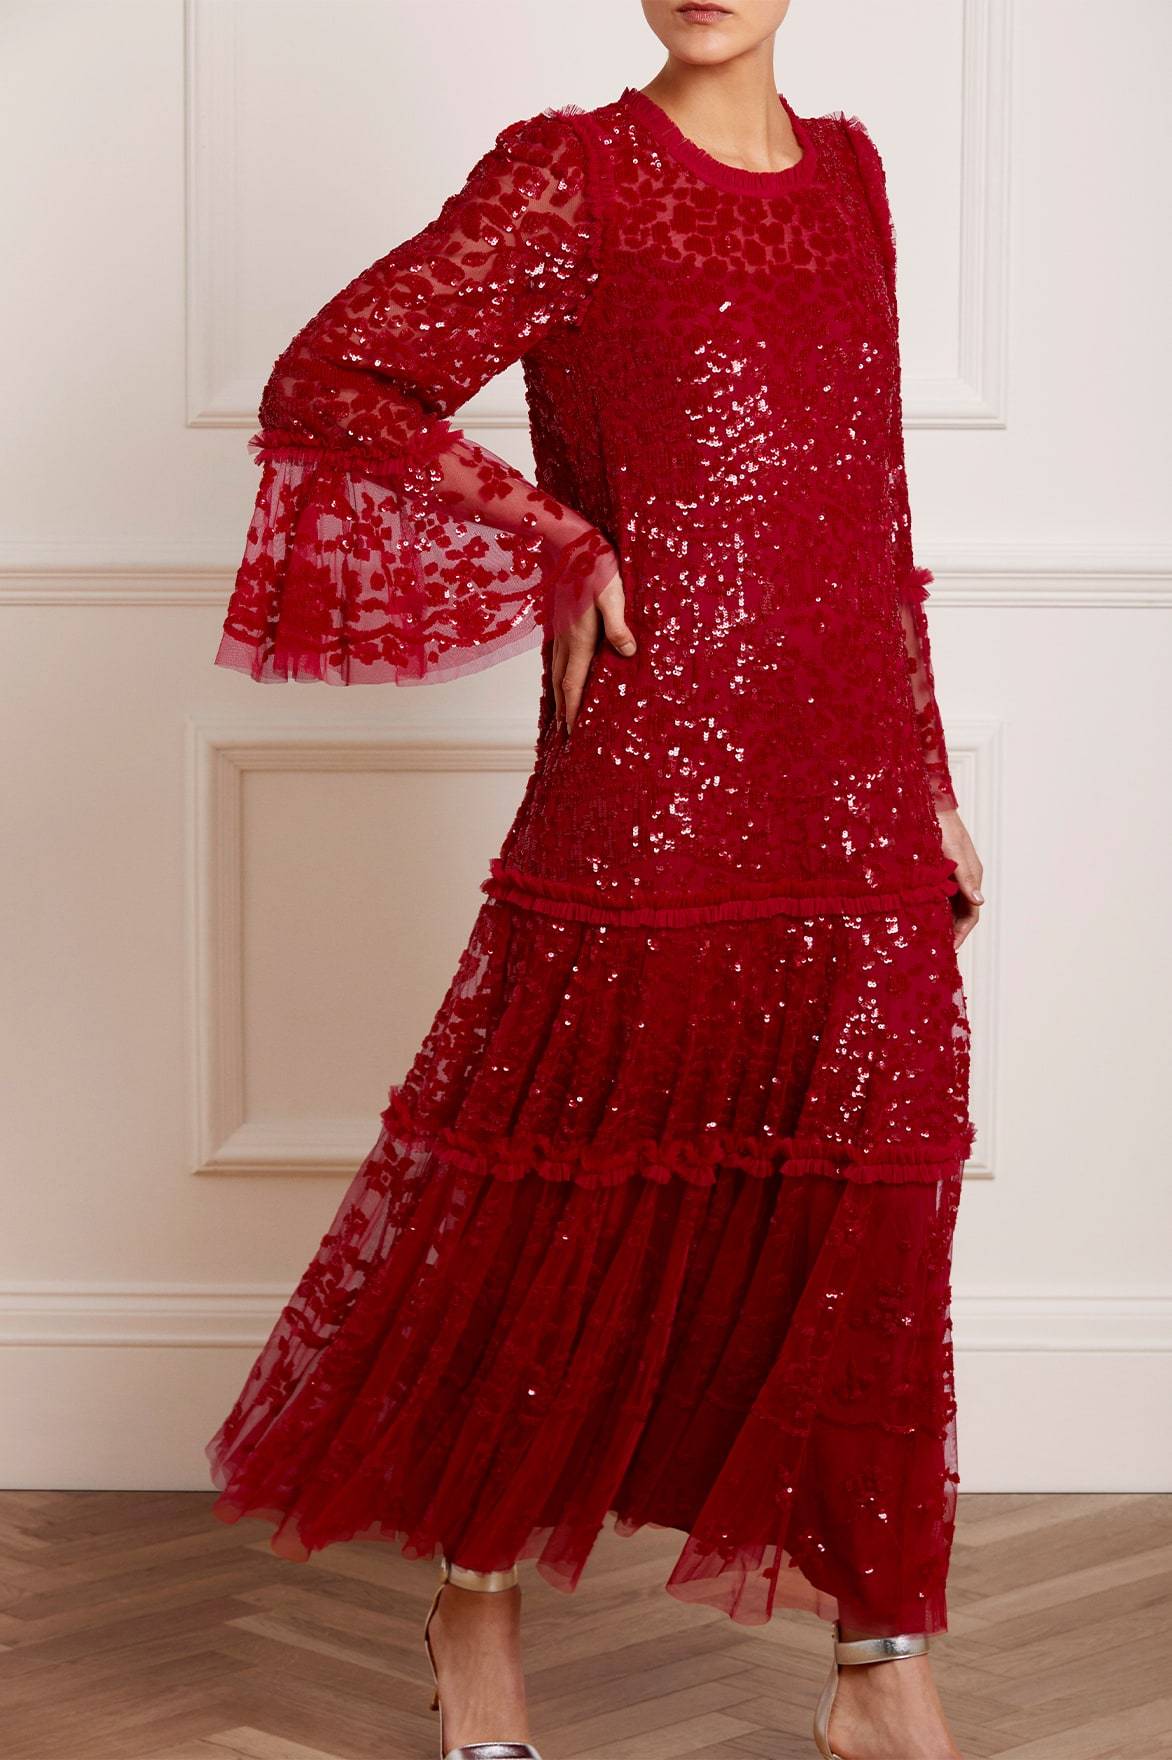 Great Gatsby Dress – Great Gatsby Dresses for Sale Needle  Thread Annie Sequin Tiered Ankle Gown Red US 16 $1,029.00 AT vintagedancer.com